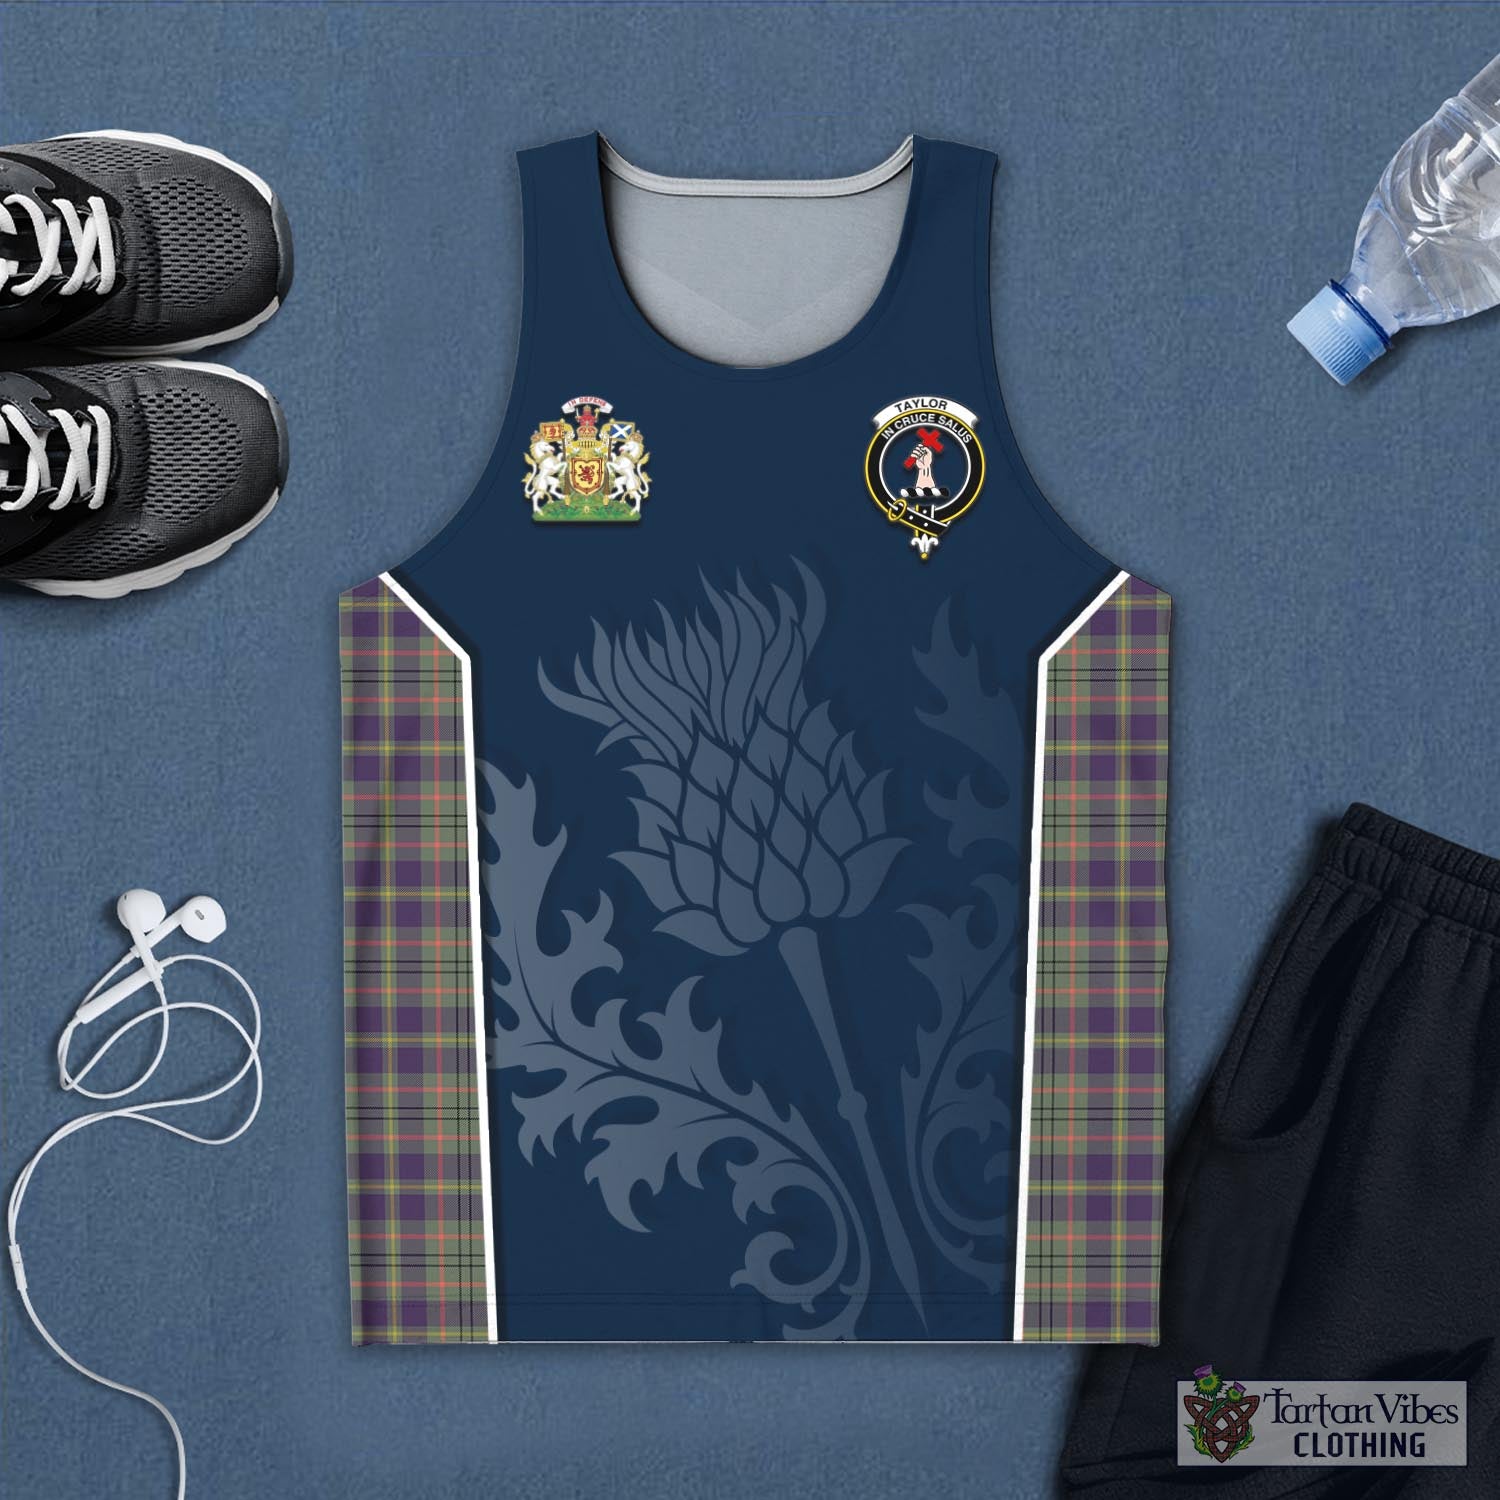 Tartan Vibes Clothing Taylor Weathered Tartan Men's Tanks Top with Family Crest and Scottish Thistle Vibes Sport Style